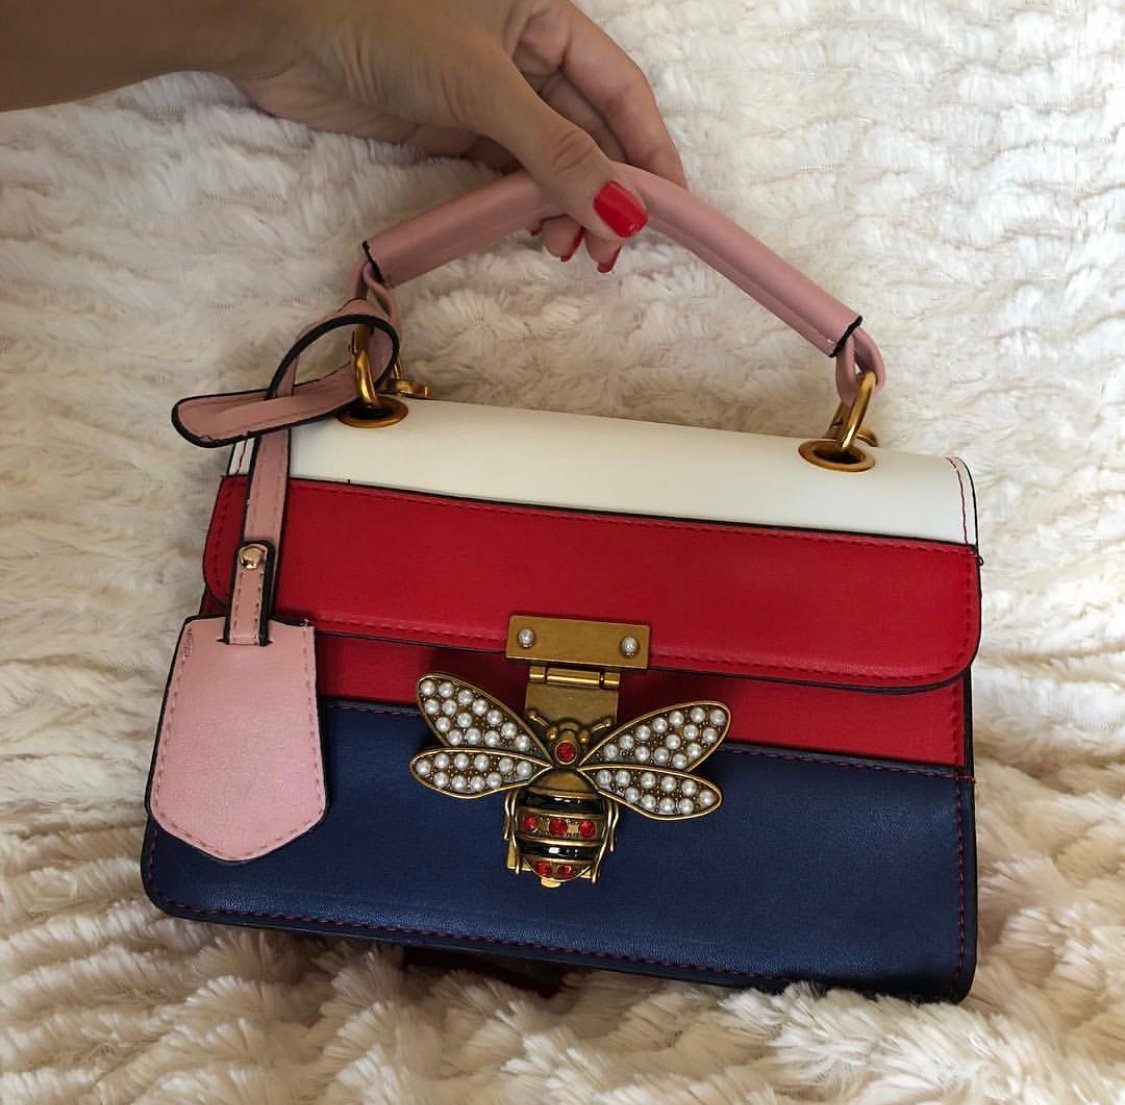 Gucci Inspired Multiway Crossbody Bag | chichappensboutique